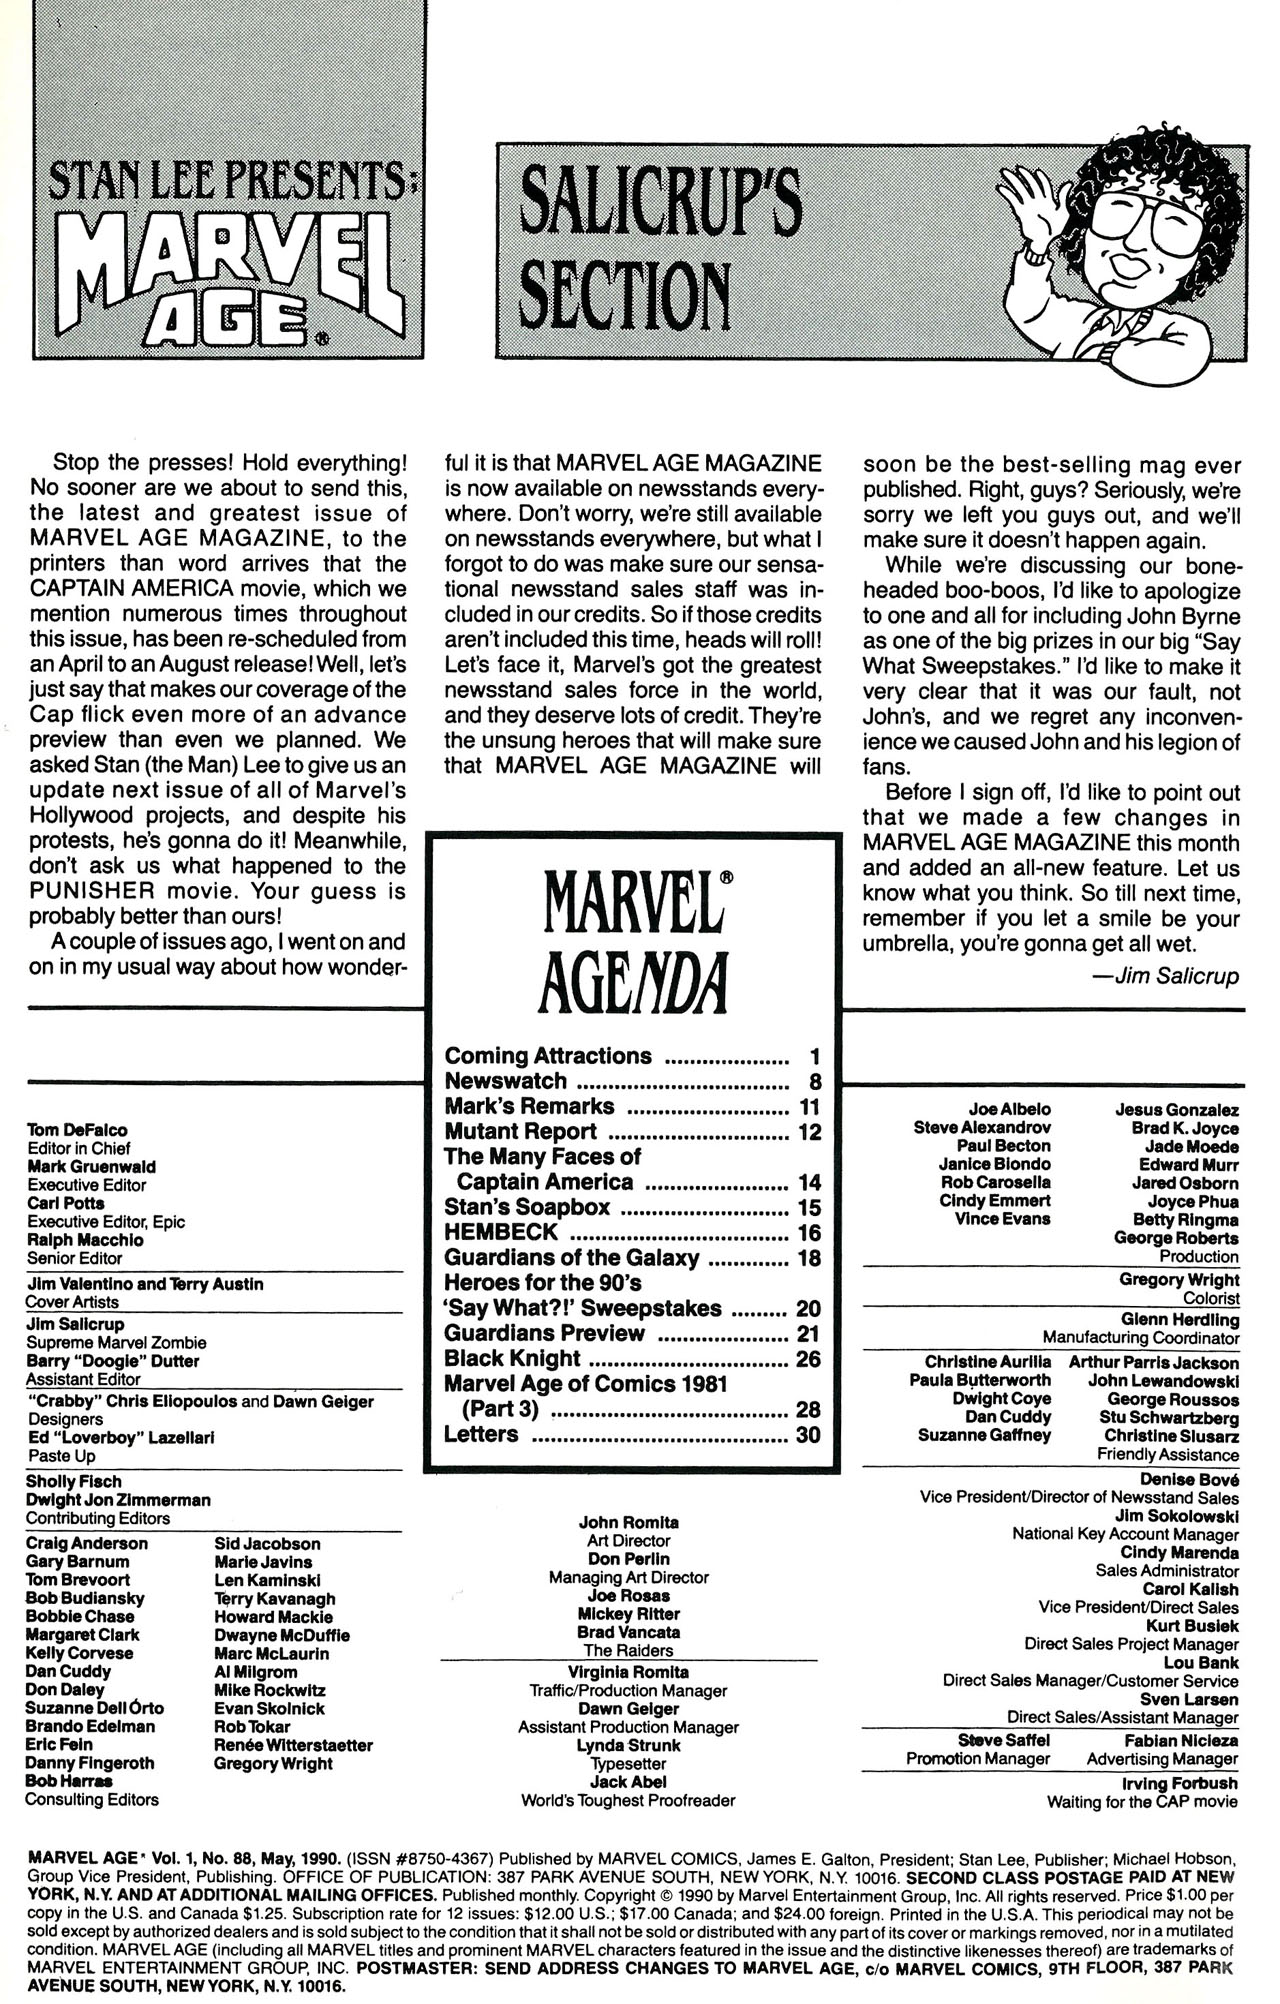 Read online Marvel Age comic -  Issue #88 - 2